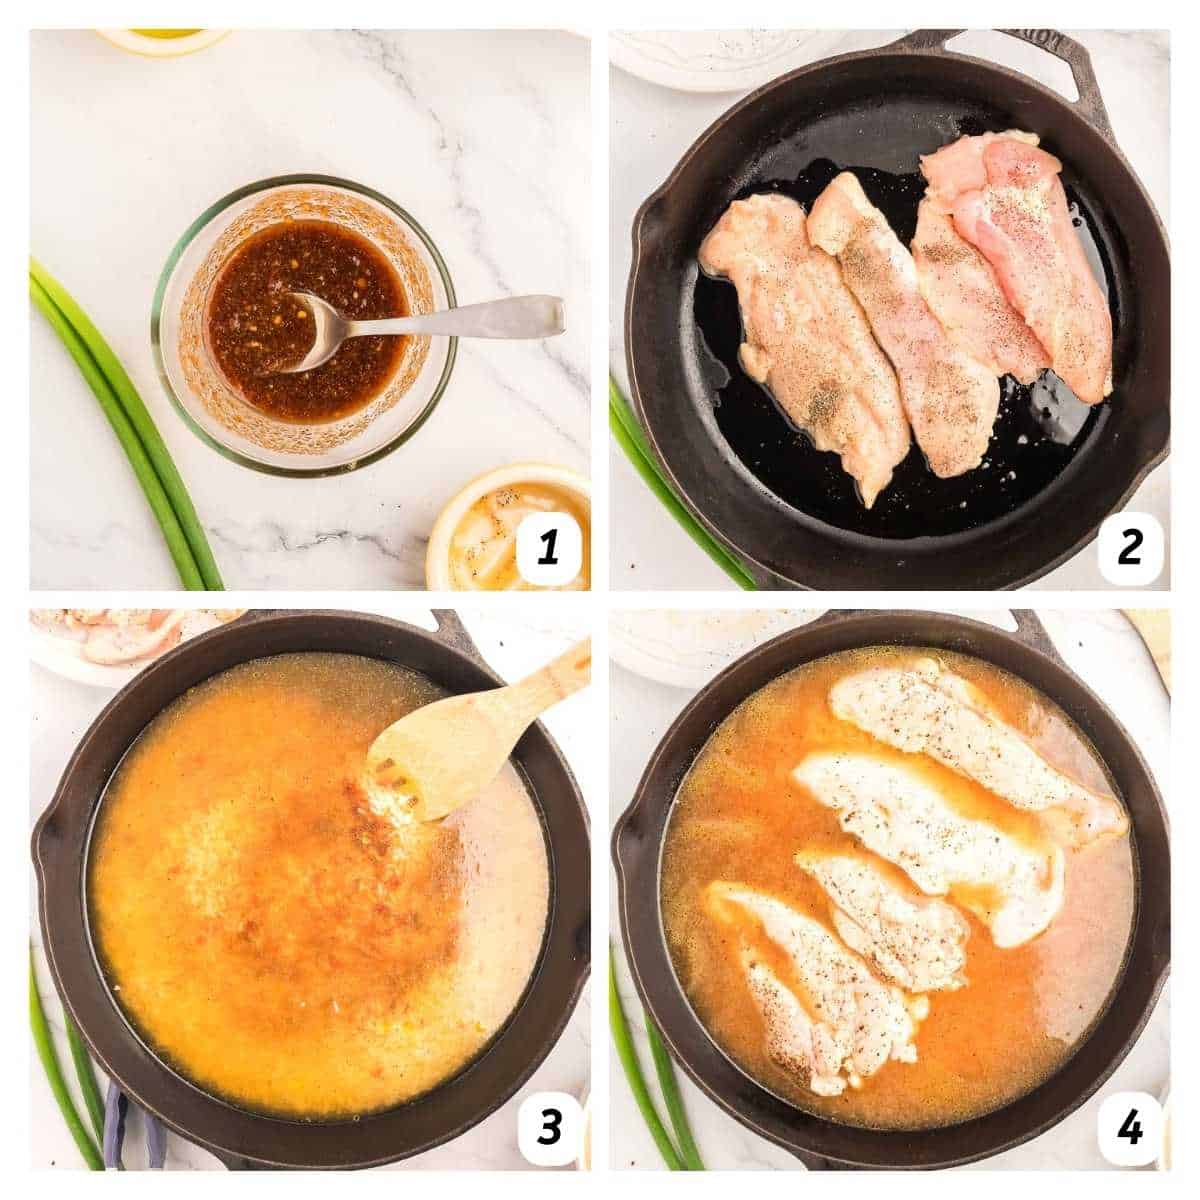 Four panel grid of process shots 1-4 - mixing marinade together, frying chicken, and gradually adding ingredients to the chicken.